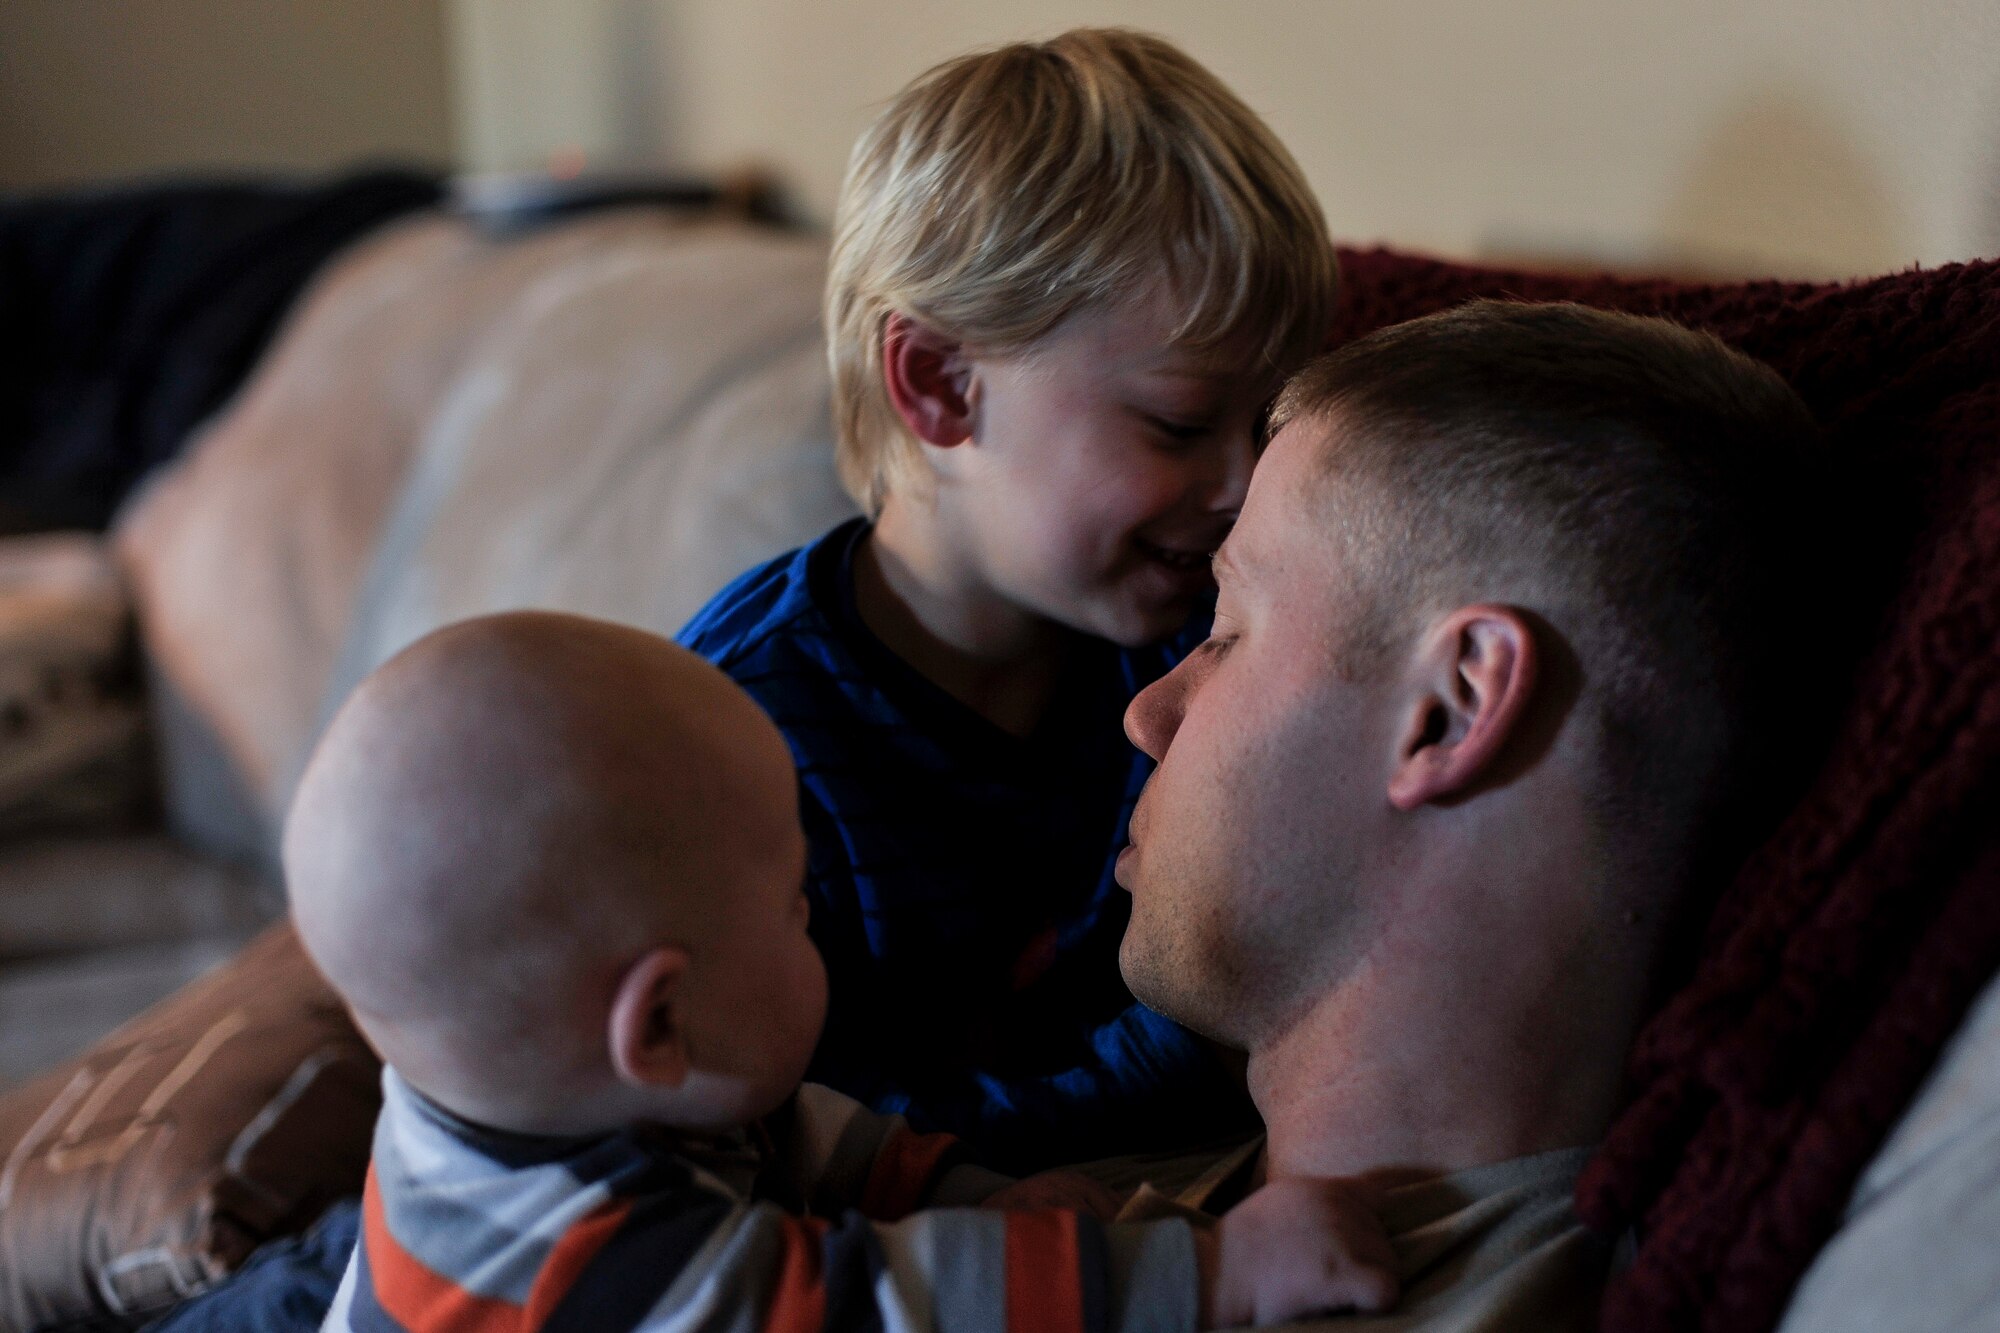 Tech. Sgt. Aaron Drain holds his sons, Ayden and Everett, on his first day home from a deployment to Afghanistan Jan. 23, 2013, in Cabot, Ark. Drain said he felt the need to tread lightly at first, and slowly work his way back into the boy’s lives. (U.S. Air Force photo by Staff Sgt. Russ Scalf)